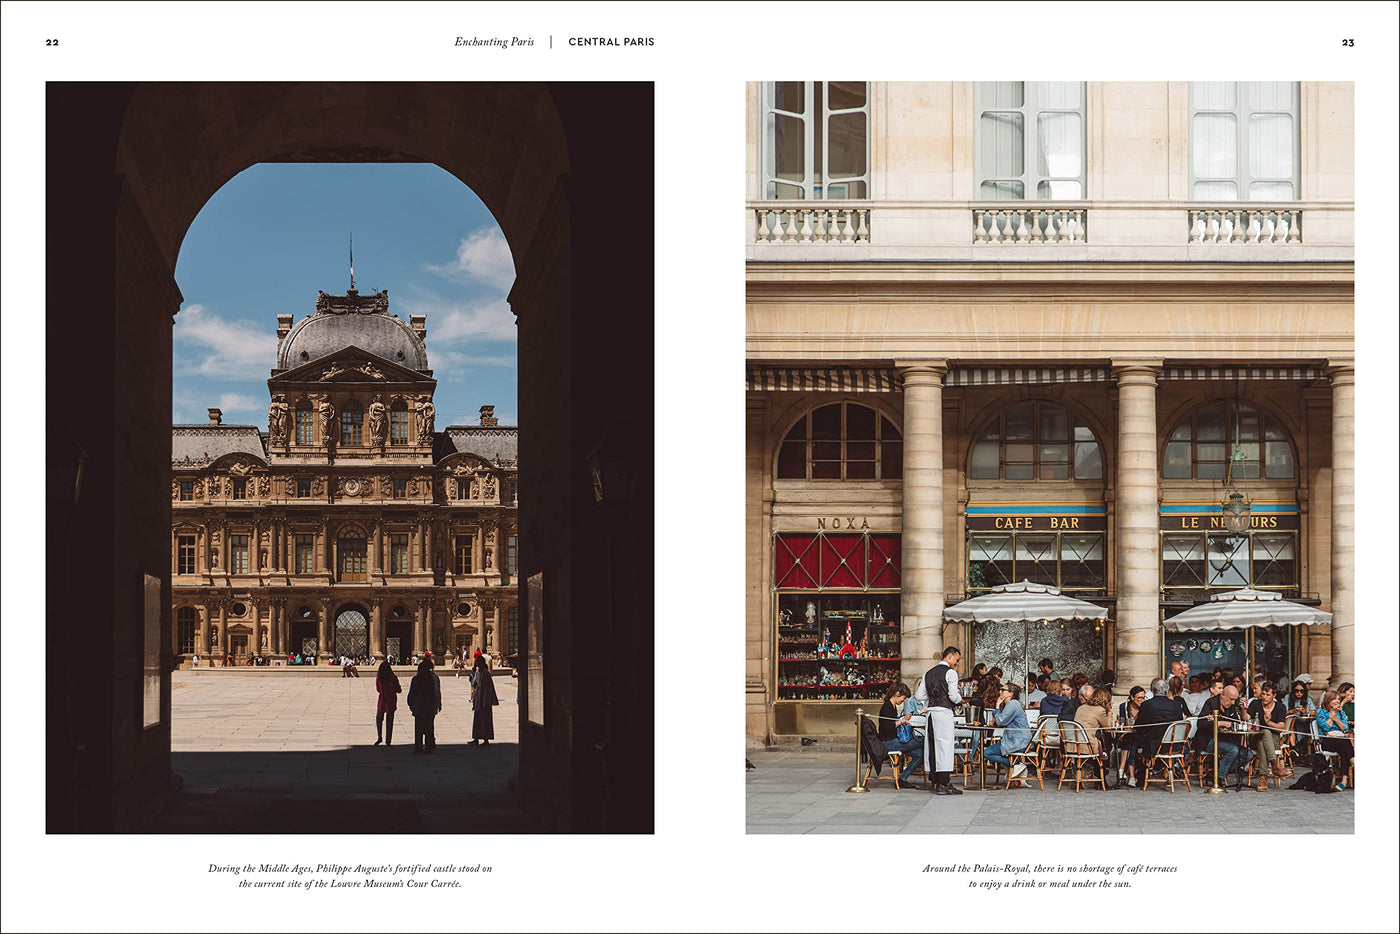 Book, Enchanting Paris: The Hedonist's Guide (The Hedonist's Guides)